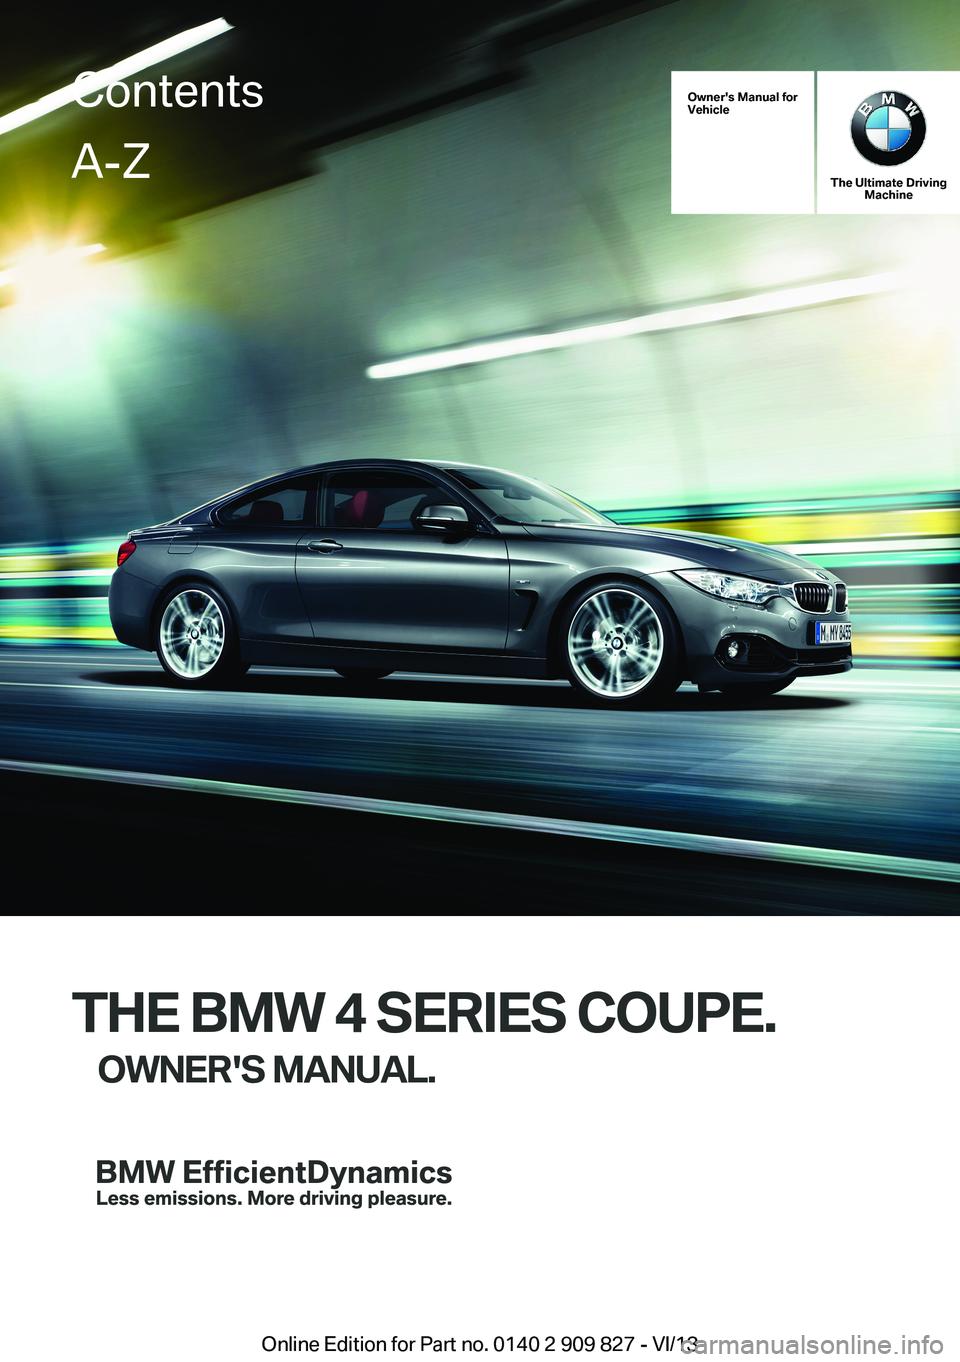 BMW 435I COUPE 2014  Owners Manual Owner's Manual forVehicle
The Ultimate DrivingMachine
THE BMW 4 SERIES COUPE.
OWNER'S MANUAL.ContentsA-Z
Online Edition for Part no. 0140 2 909 827 - VI/13   